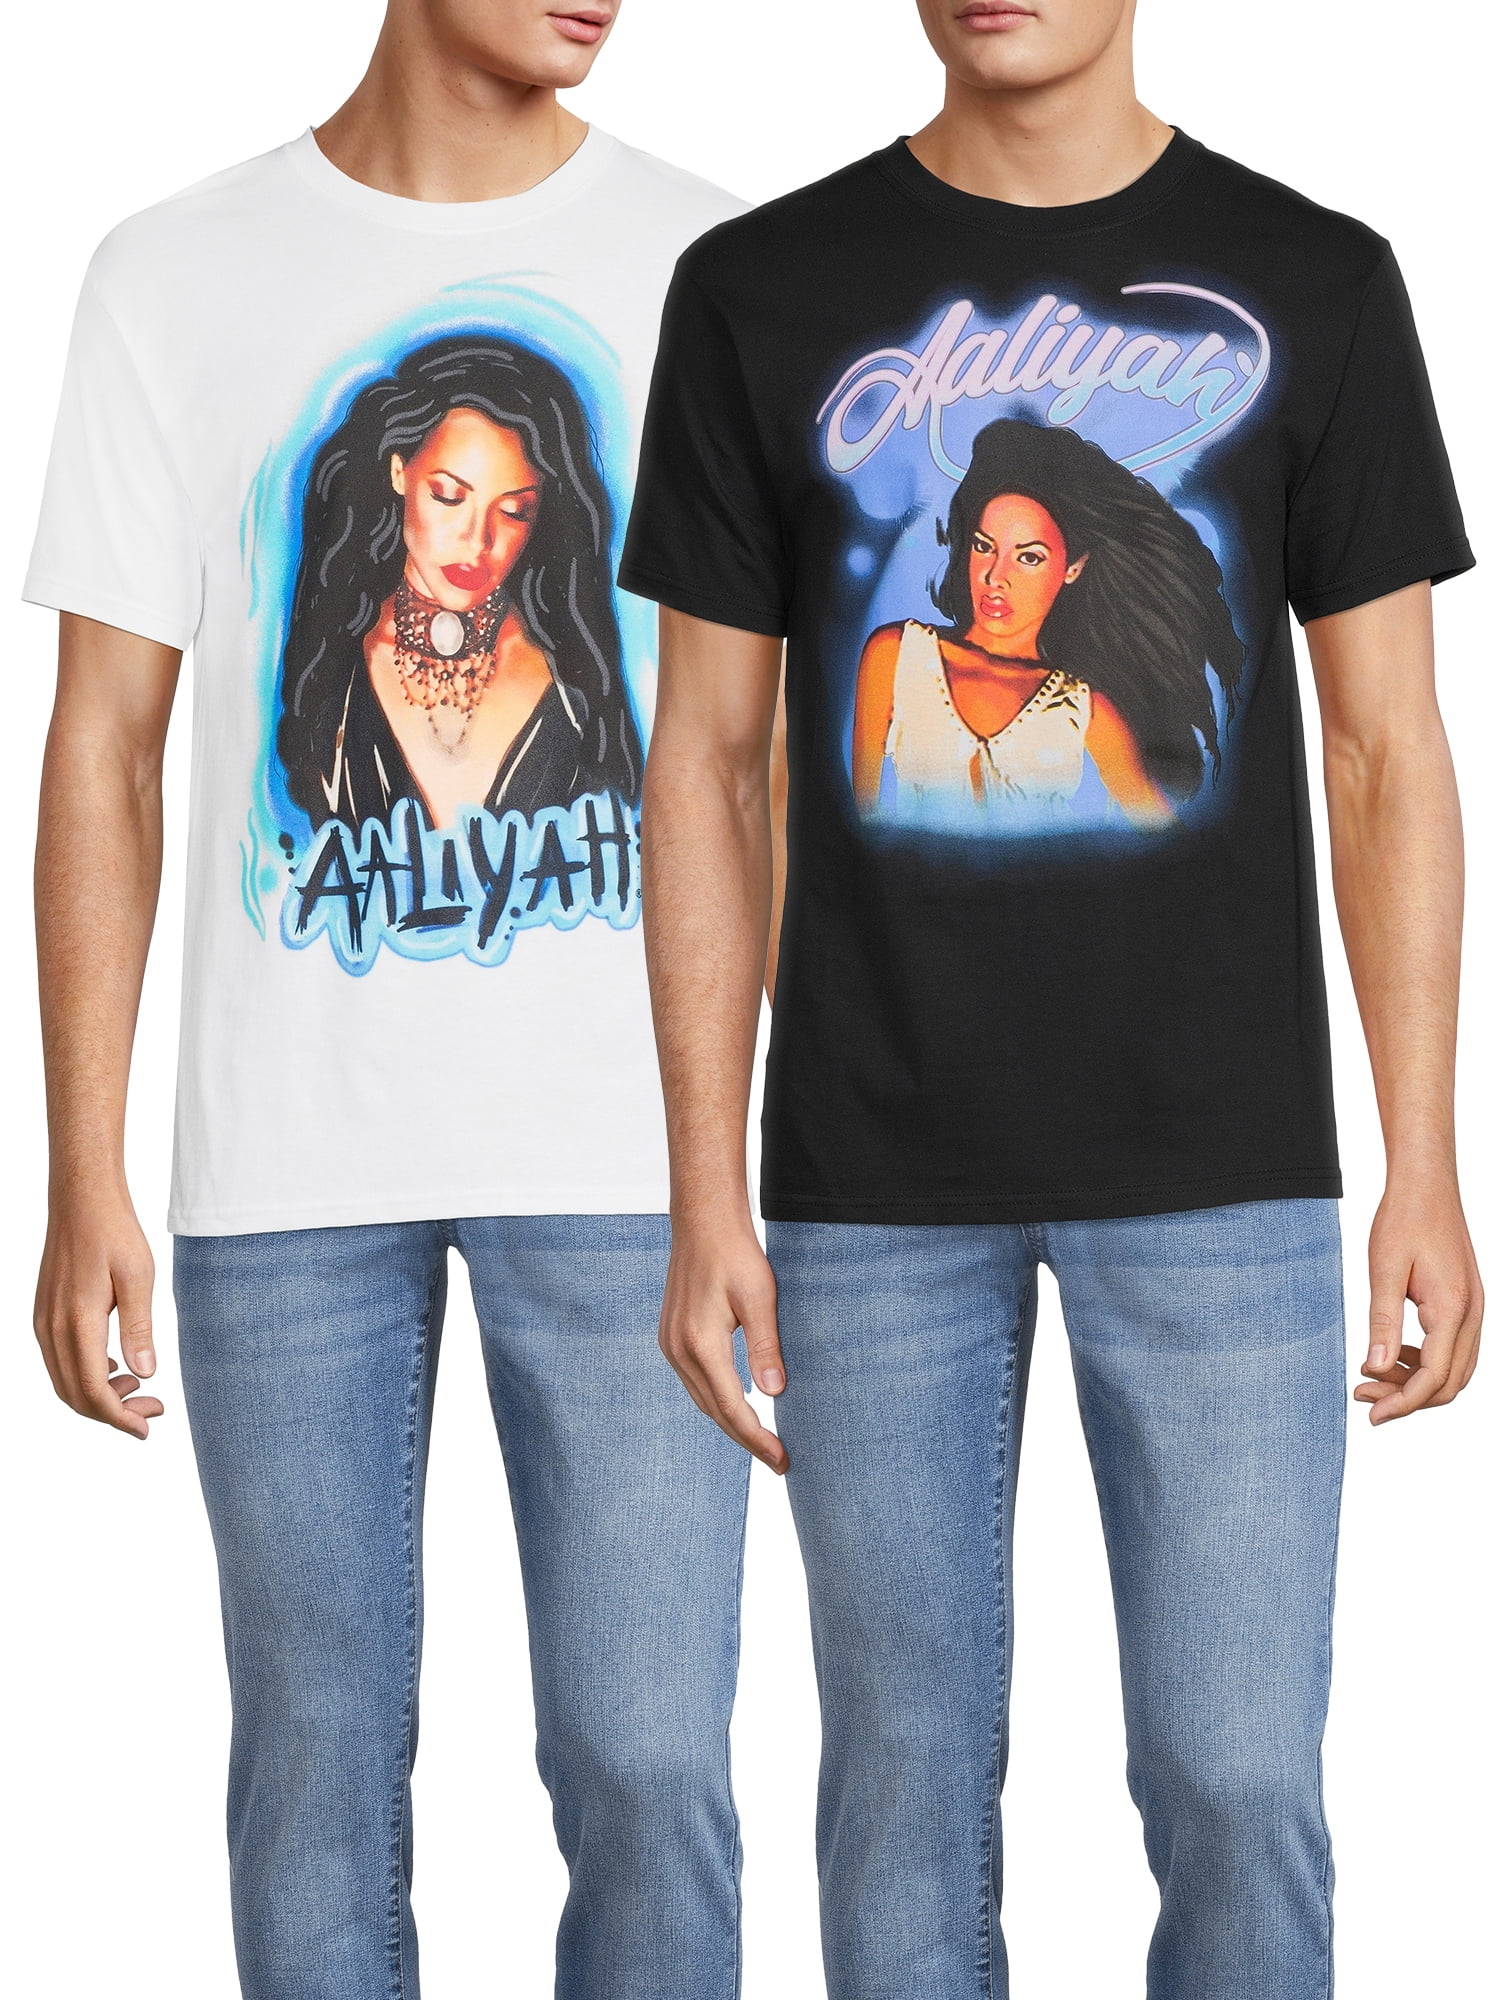 Aaliyah T Shirt Aaliyah Tee Aaliyah Shirt Aaliyah Clothing All Size S-2XL 